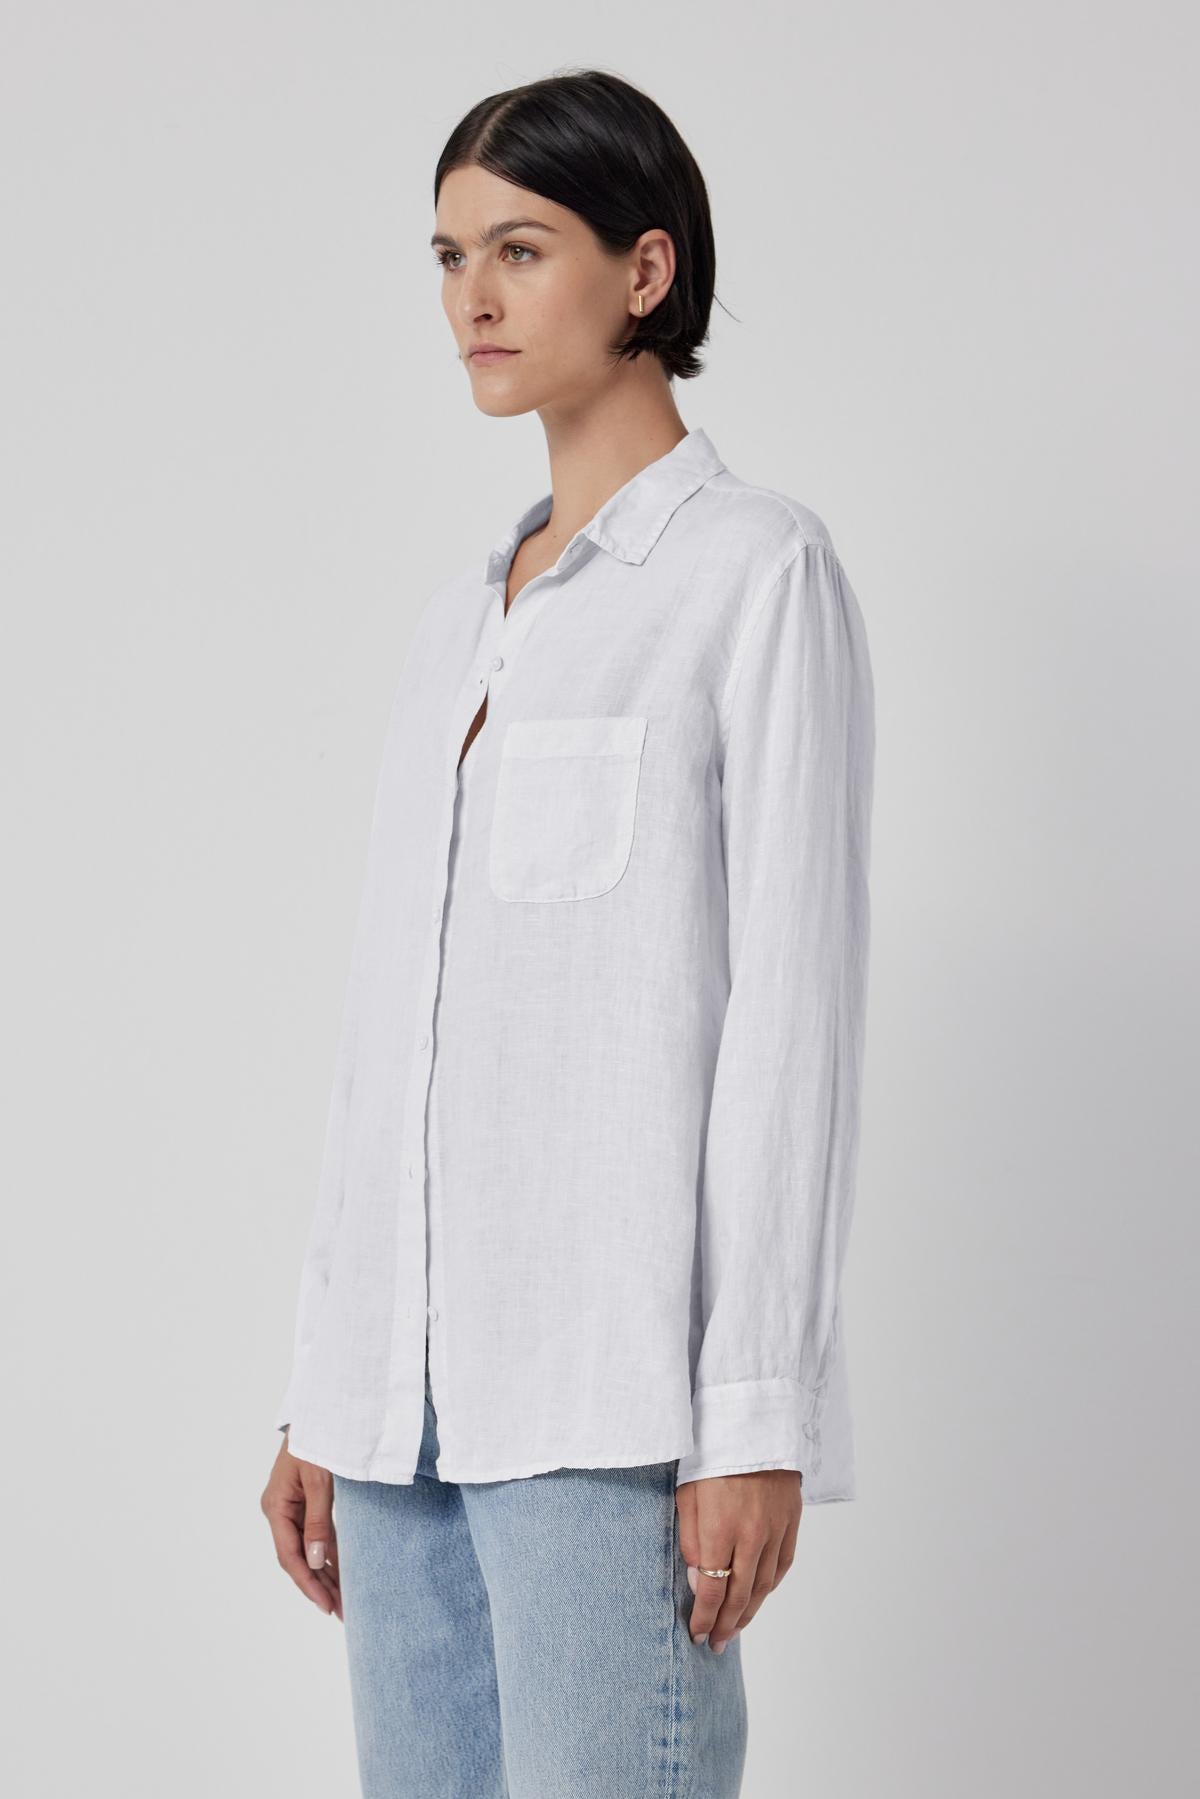   Woman wearing a Velvet by Jenny Graham Mulholland Shirt, a relaxed silhouette, casual white linen button-up shirt with a chest pocket, paired with denim jeans, against a neutral background. 